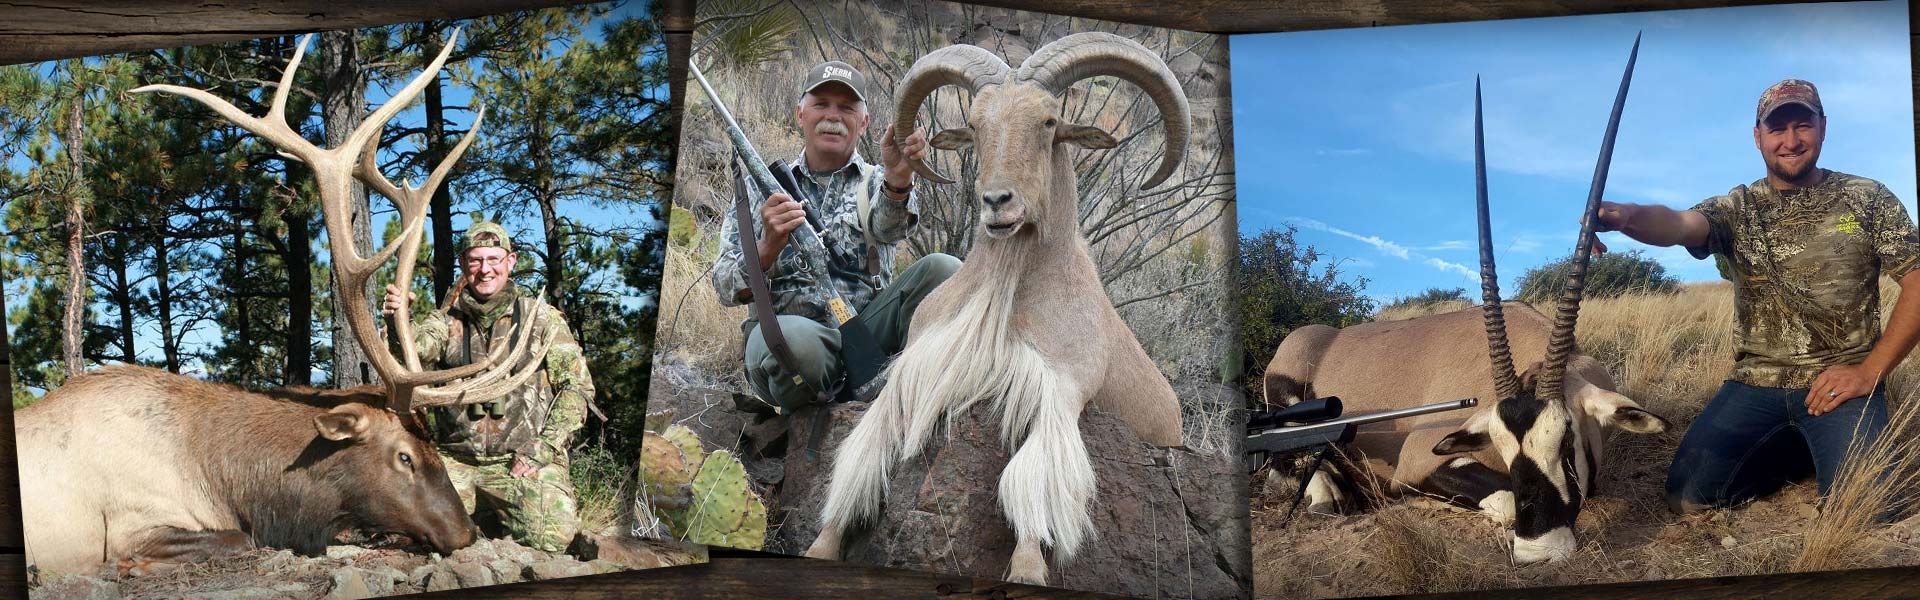 Big Rim Outfitters - Photo Gallery